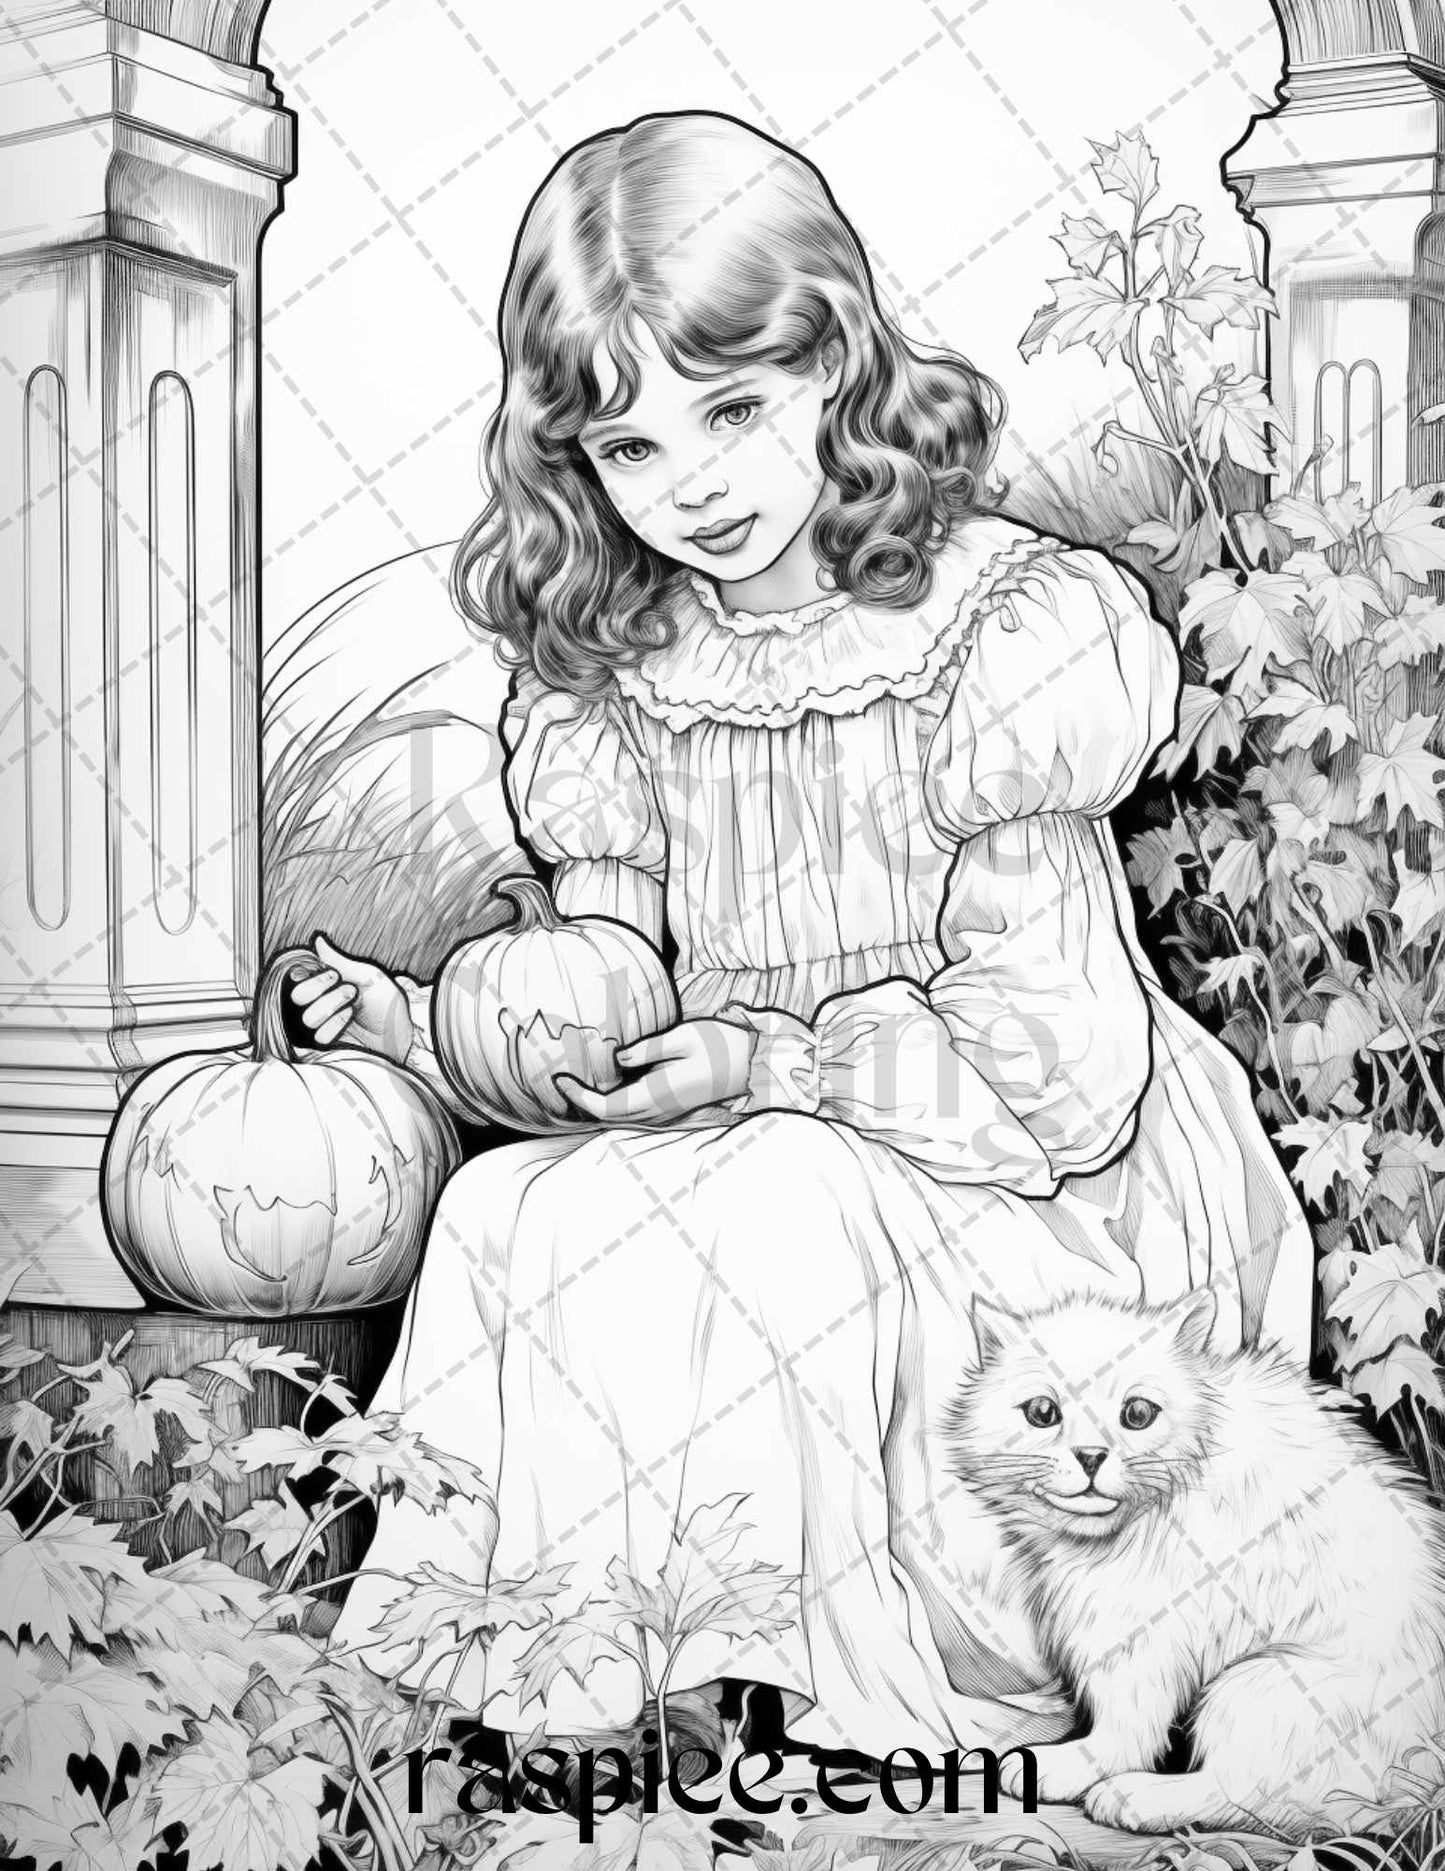 Vintage Halloween Coloring Pages, Grayscale Trick or Treat Designs, Adult Printable Coloring Sheets, Retro Halloween Decorations, DIY Coloring Book Pages, Autumn Coloring Pages, Vintage Halloween DIY Craft, Halloween Grayscale Coloring Pages, October Coloring Pages